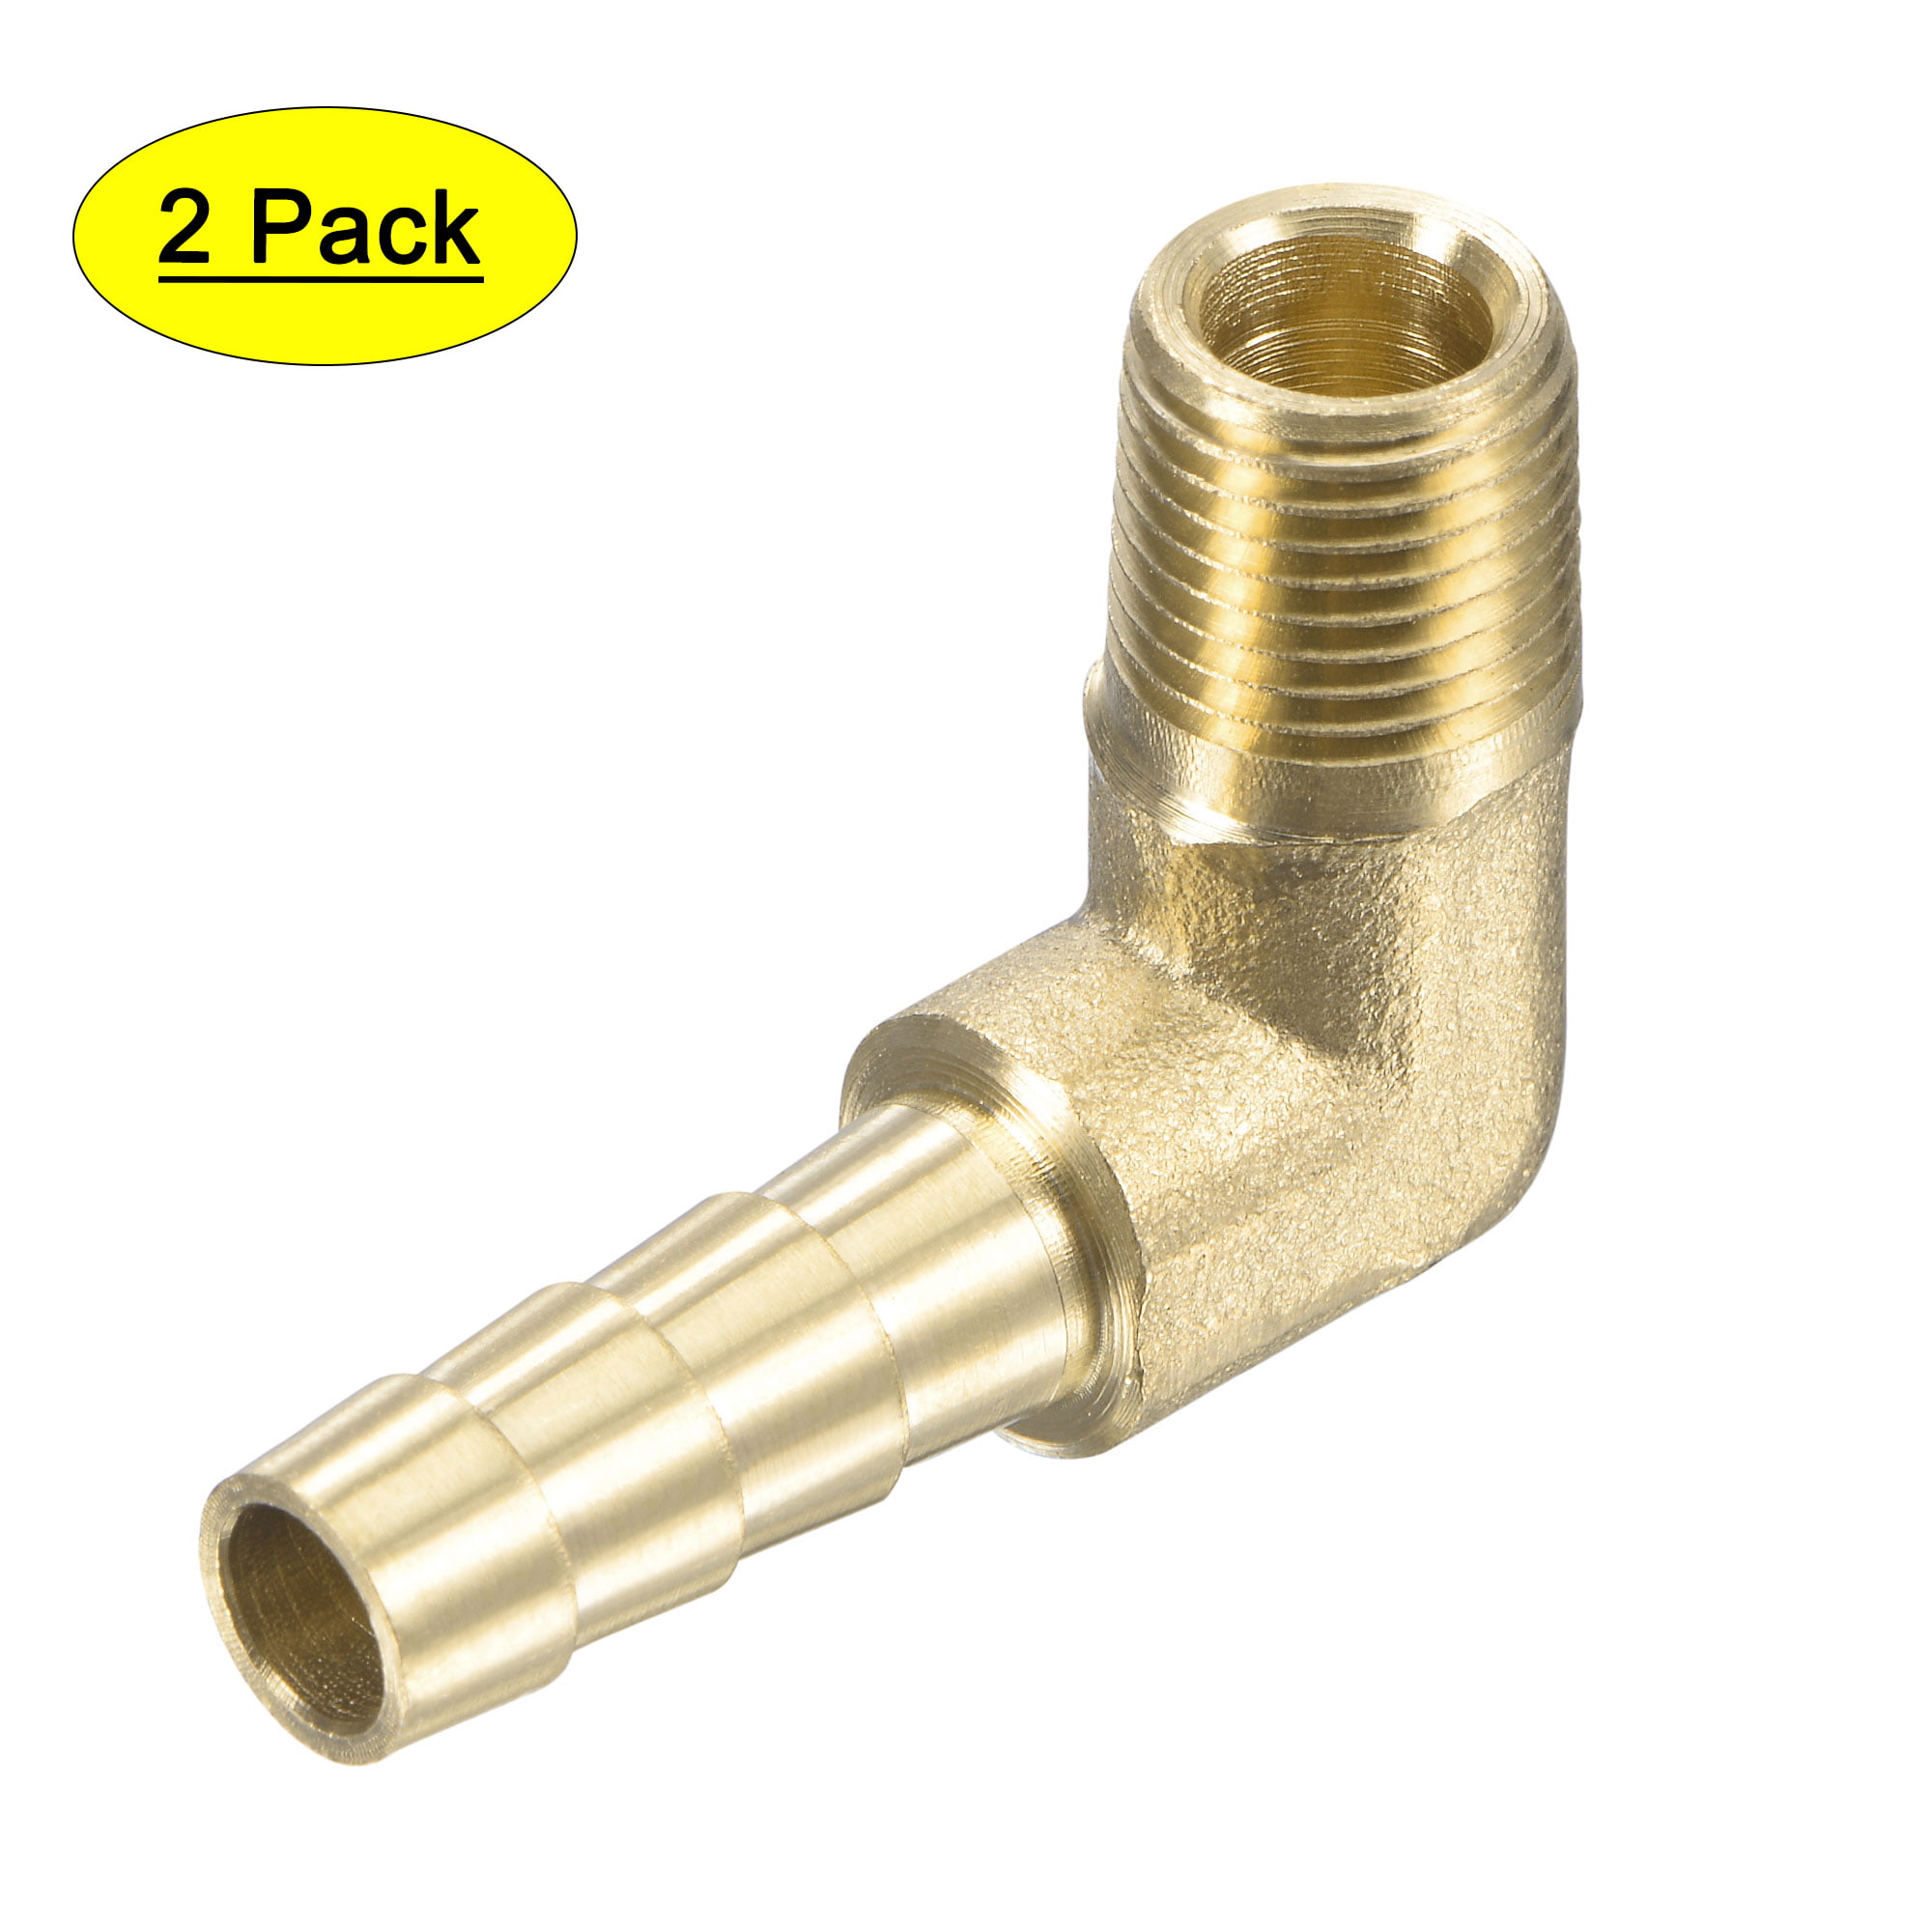 1/8" NPT Male Elbow Barbed Brass Fitting Air 5/16" Hose ID Gas Oil Water 